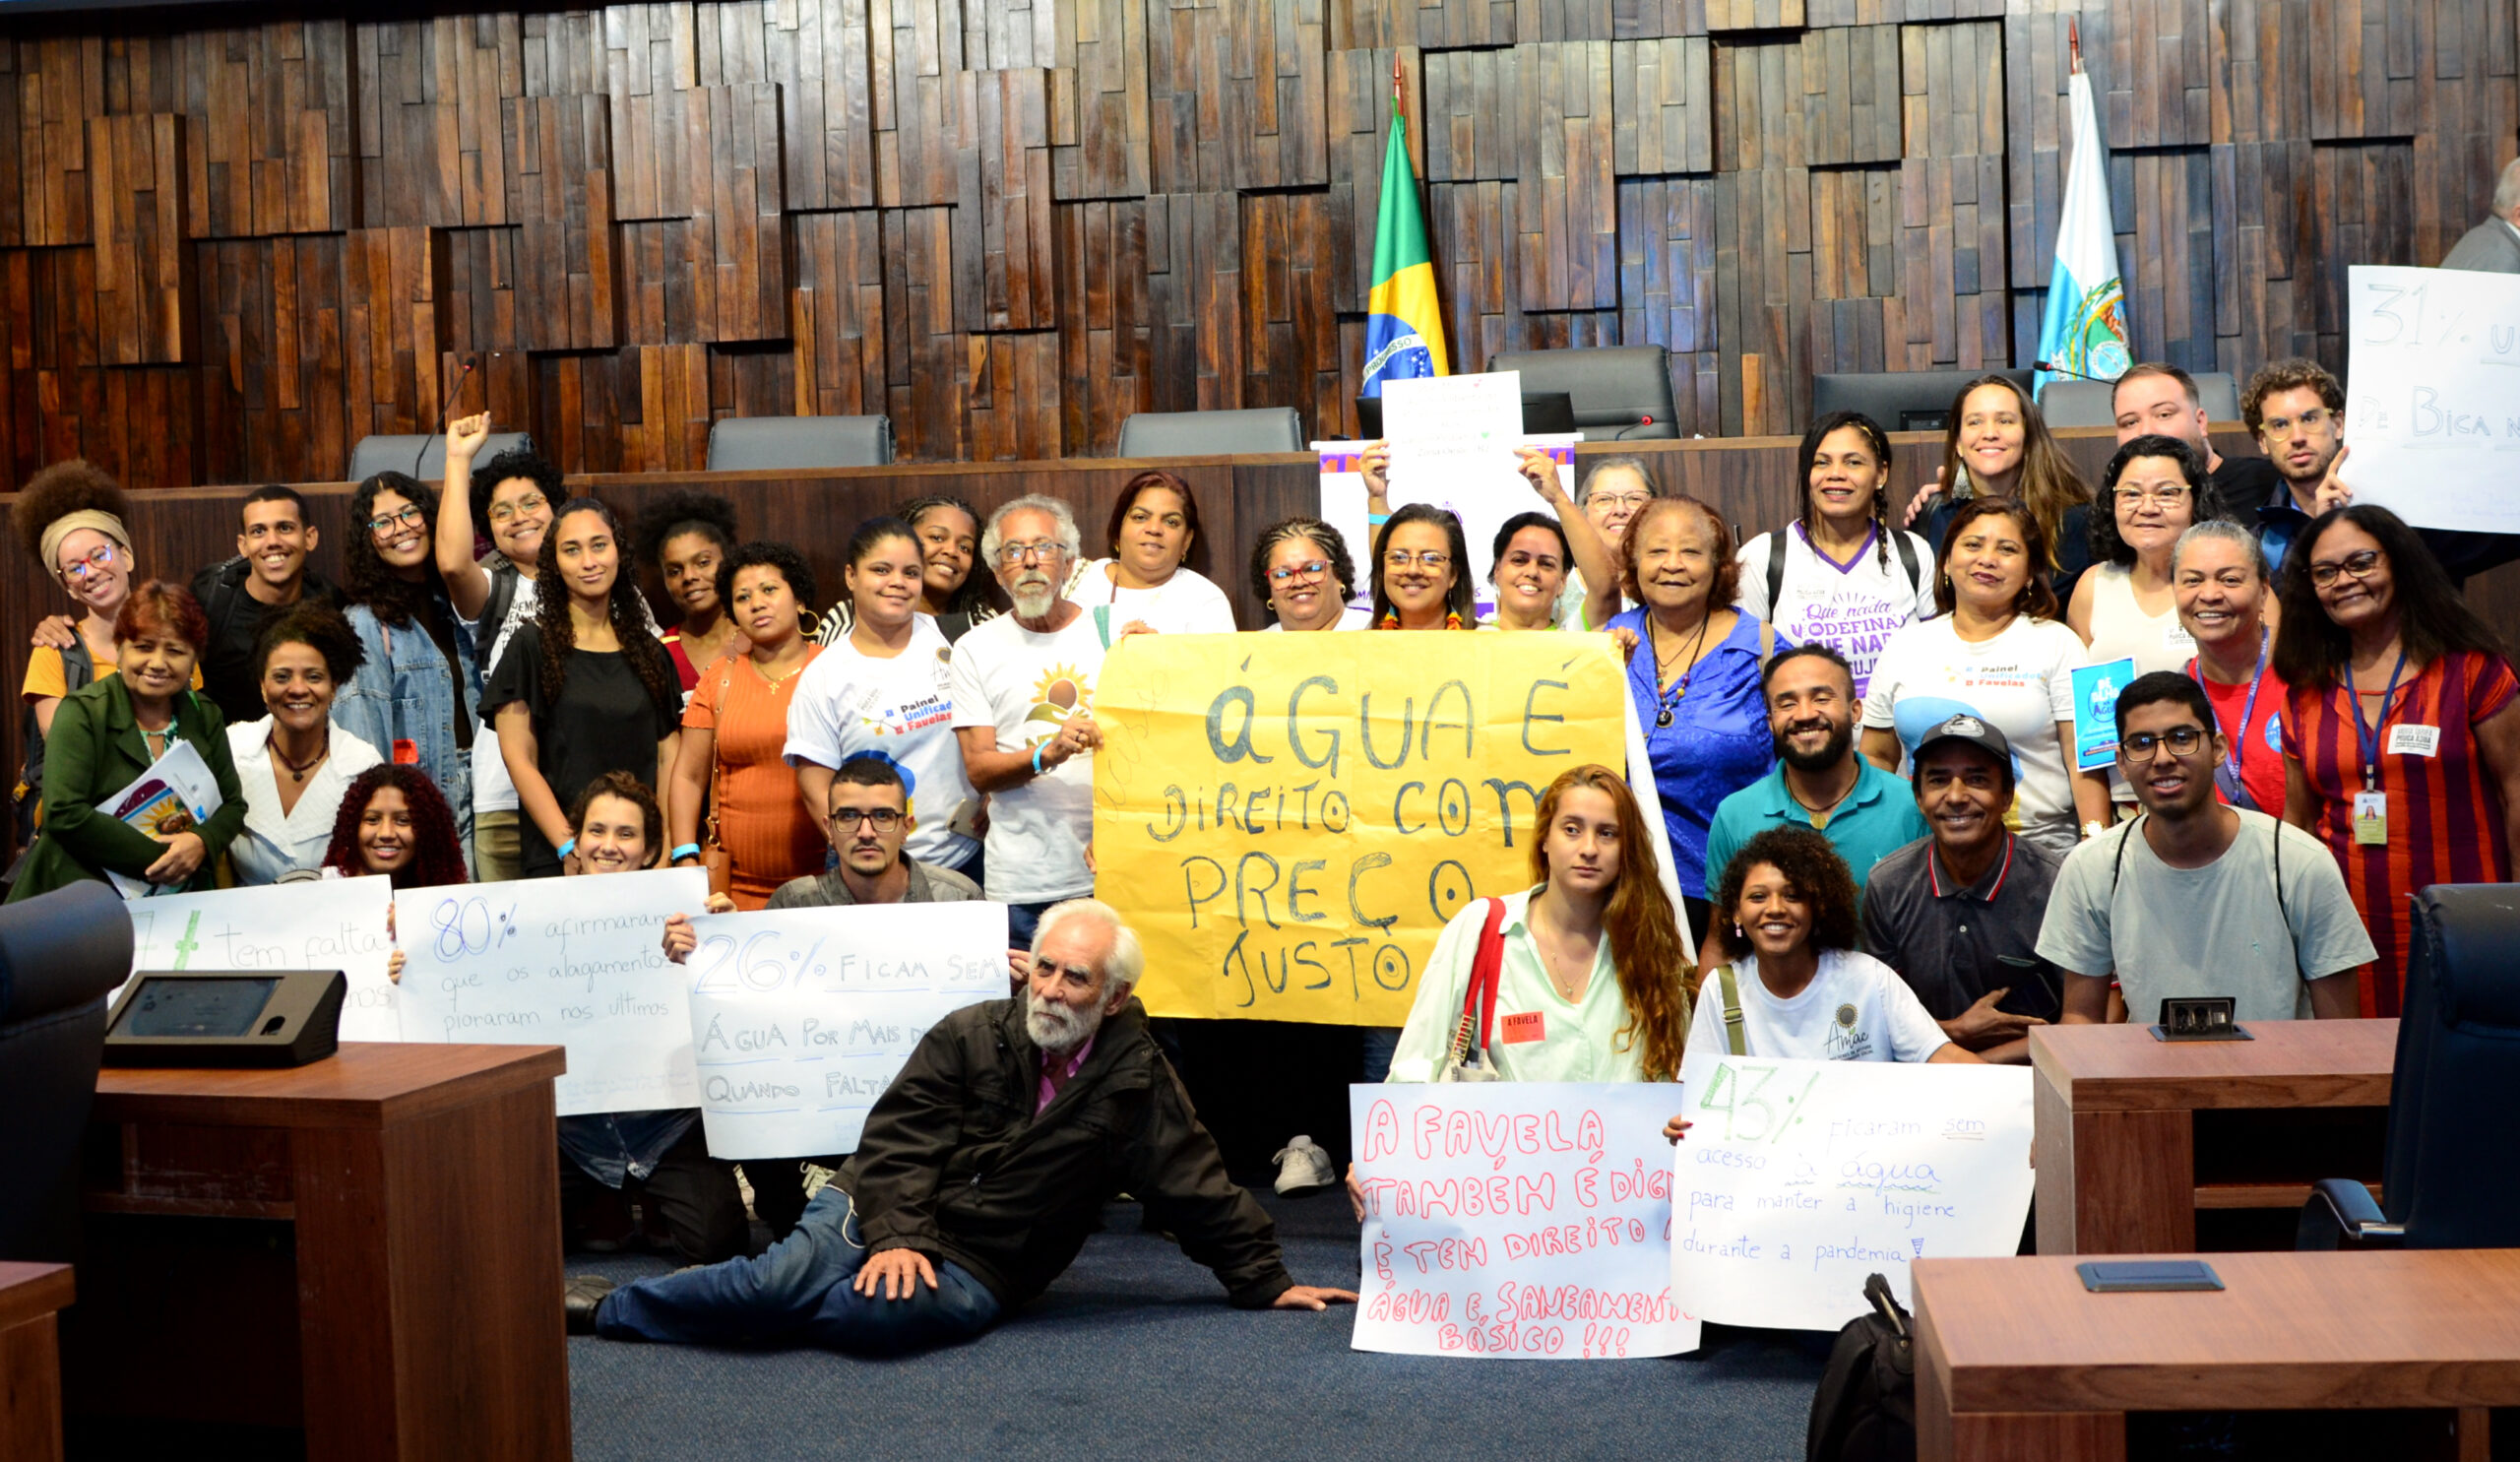 Civil society members crowded the public hearing ‘The Human Right to Water: High Rates and a Lack of Water?’ held at the State of Rio de Janeiro Legislative Assembly (ALERJ), by the Human Rights Commission. Photo: Patricia Schneidewind